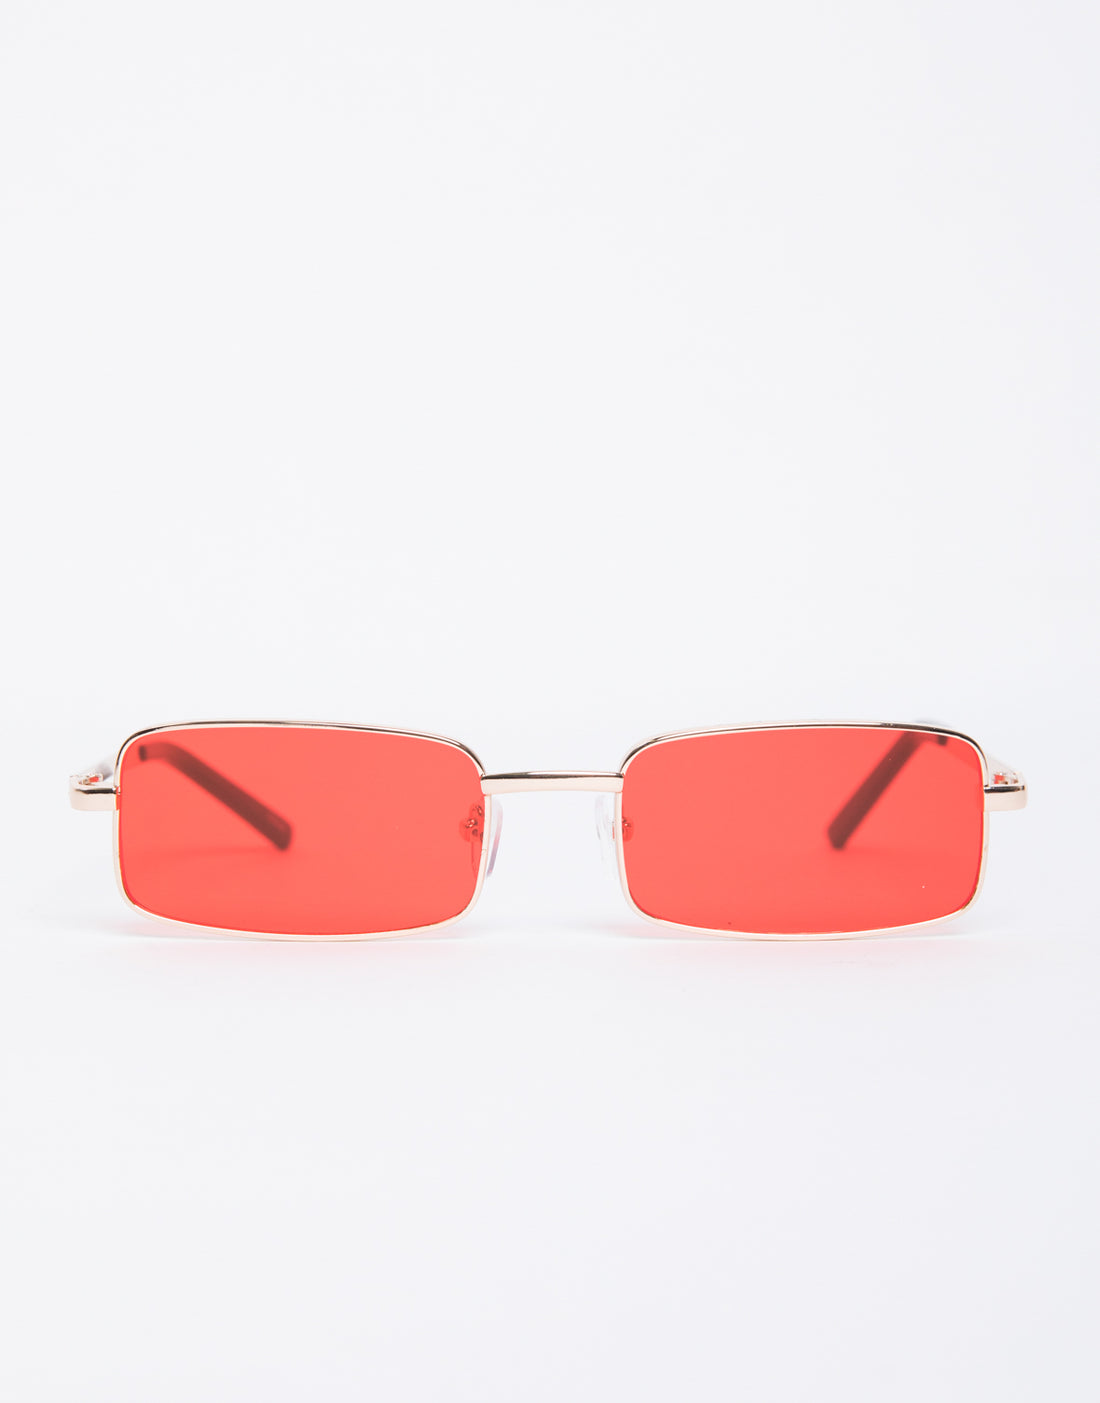 Festival Ready Sunnies Accessories Red One Size -2020AVE